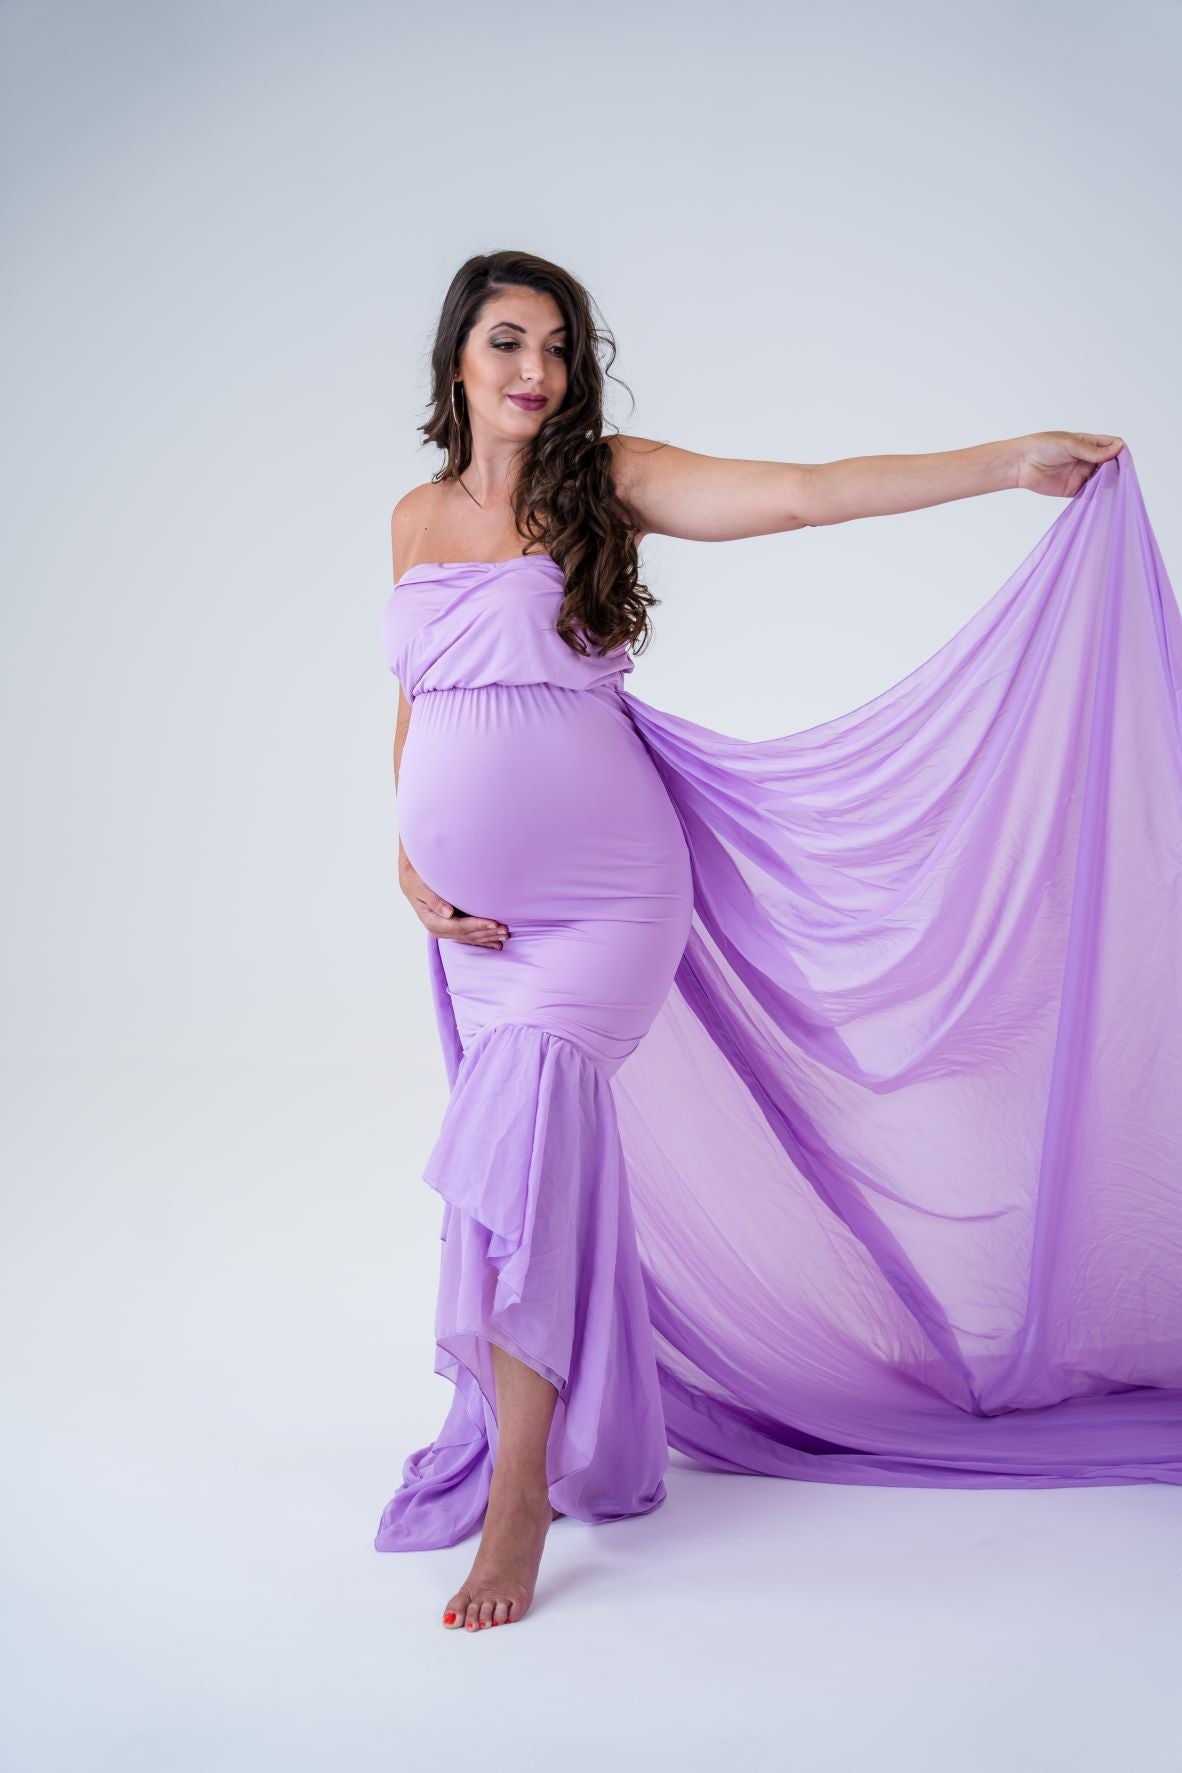 Maternity Photoshoot Dresses - Flow - Purple Gown - 4 DAY RENTAL - Luxe Bumps AU